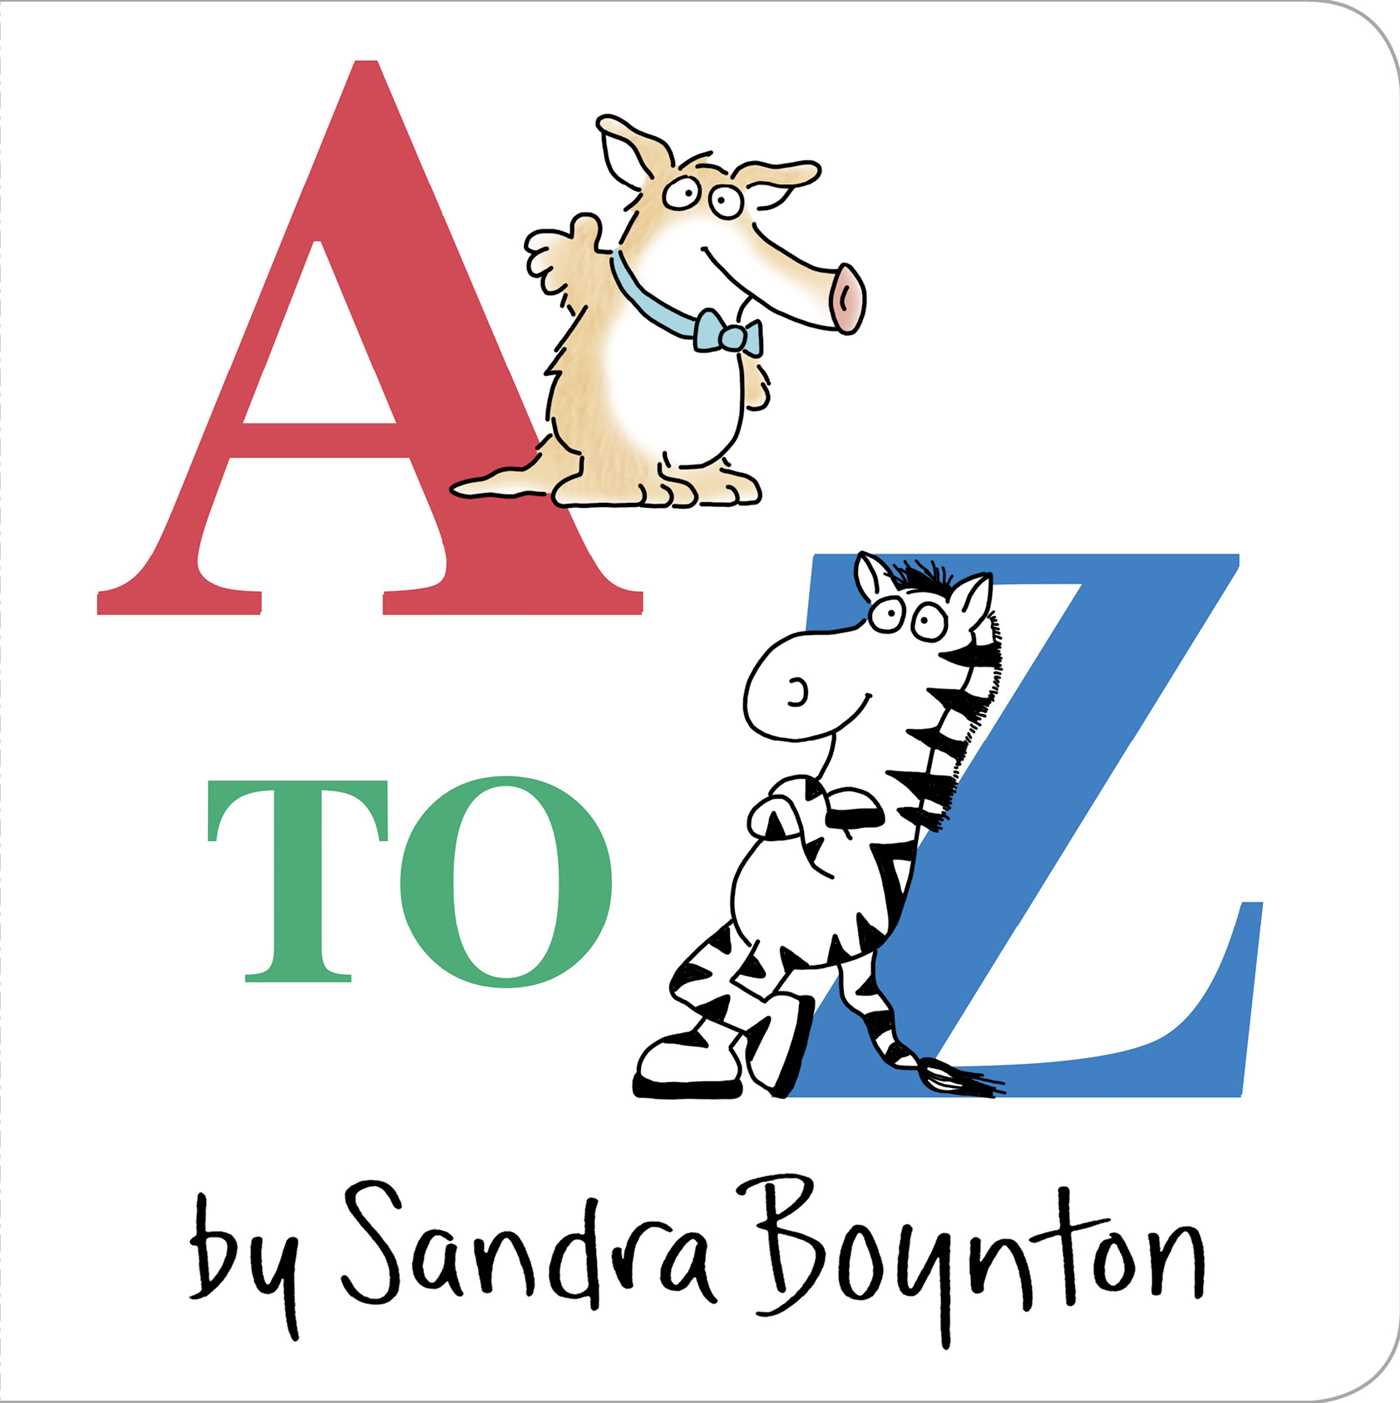 A to Z (Board book) - image 1 of 2